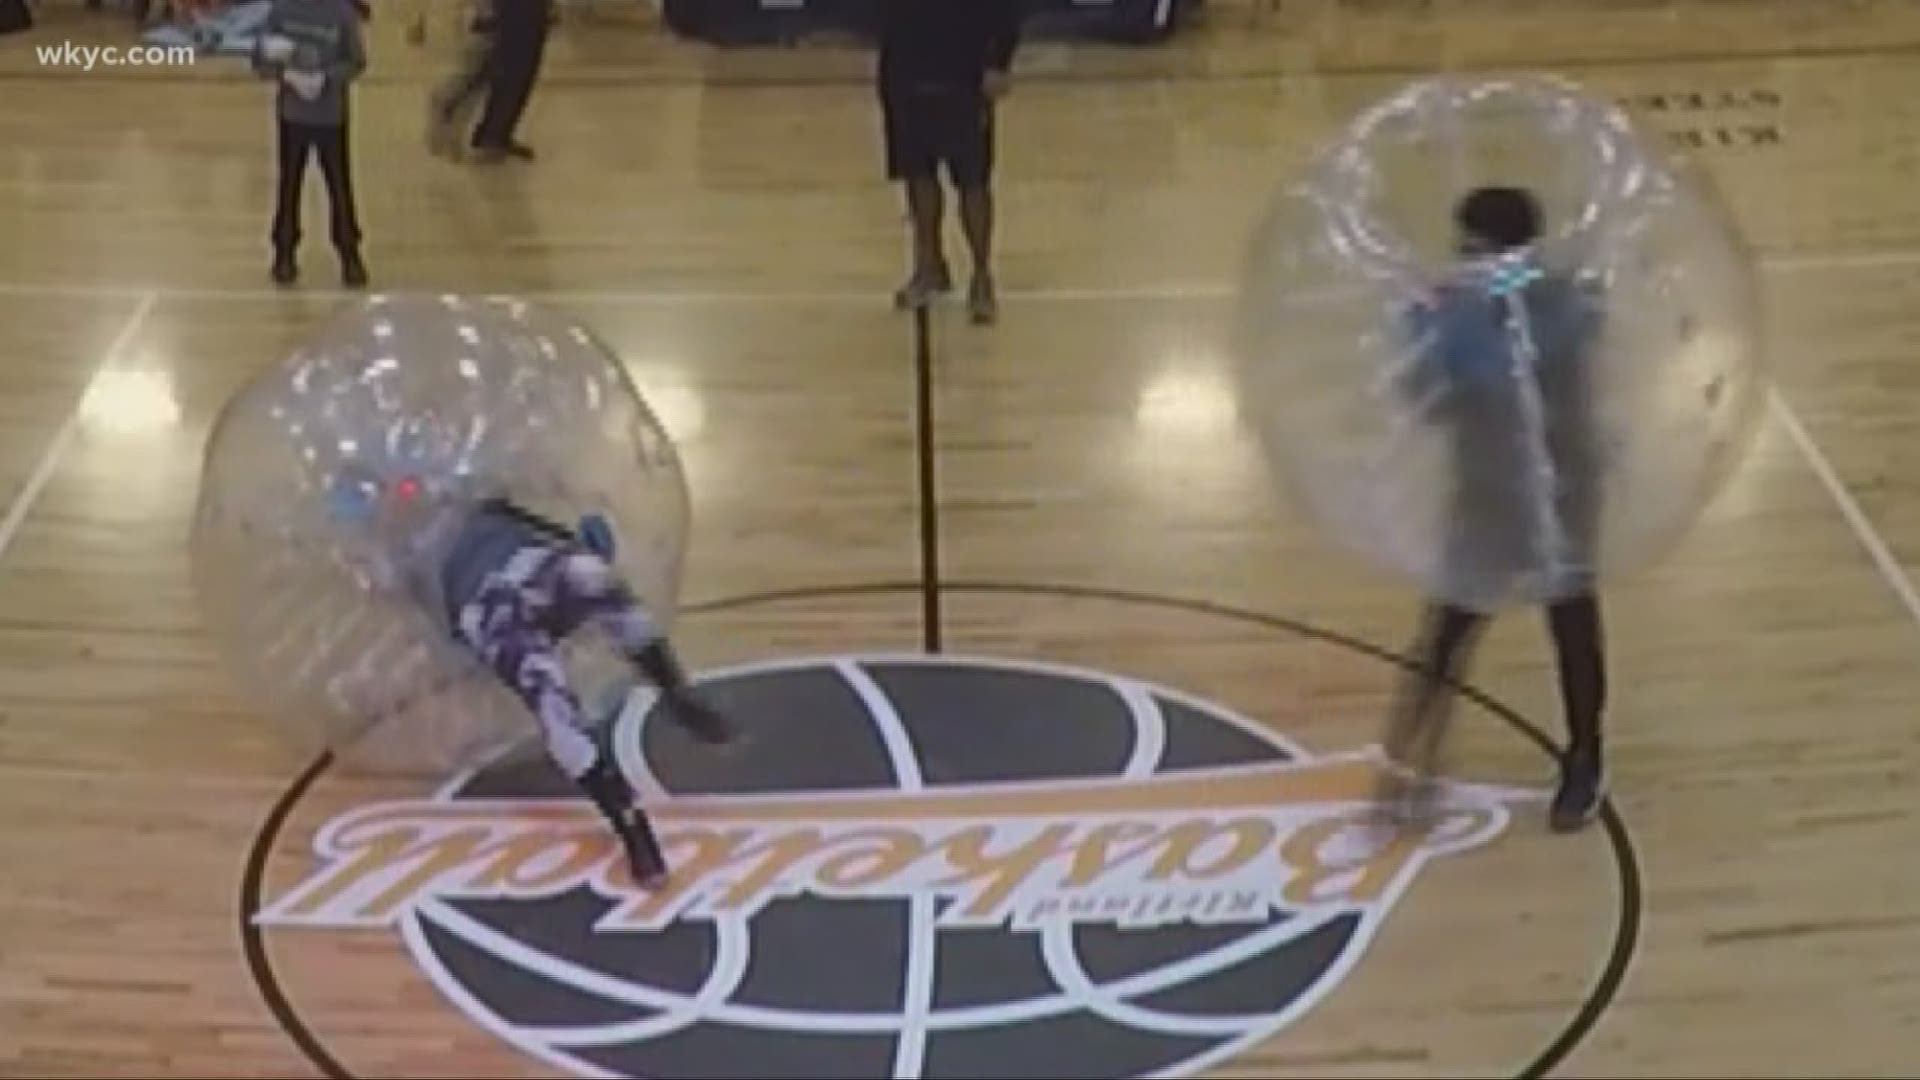 It's supposed to be fun to be wrapped inside giant, soft inflatable plastic, called bubble balls. A local woman says they're not as safe as they appear.